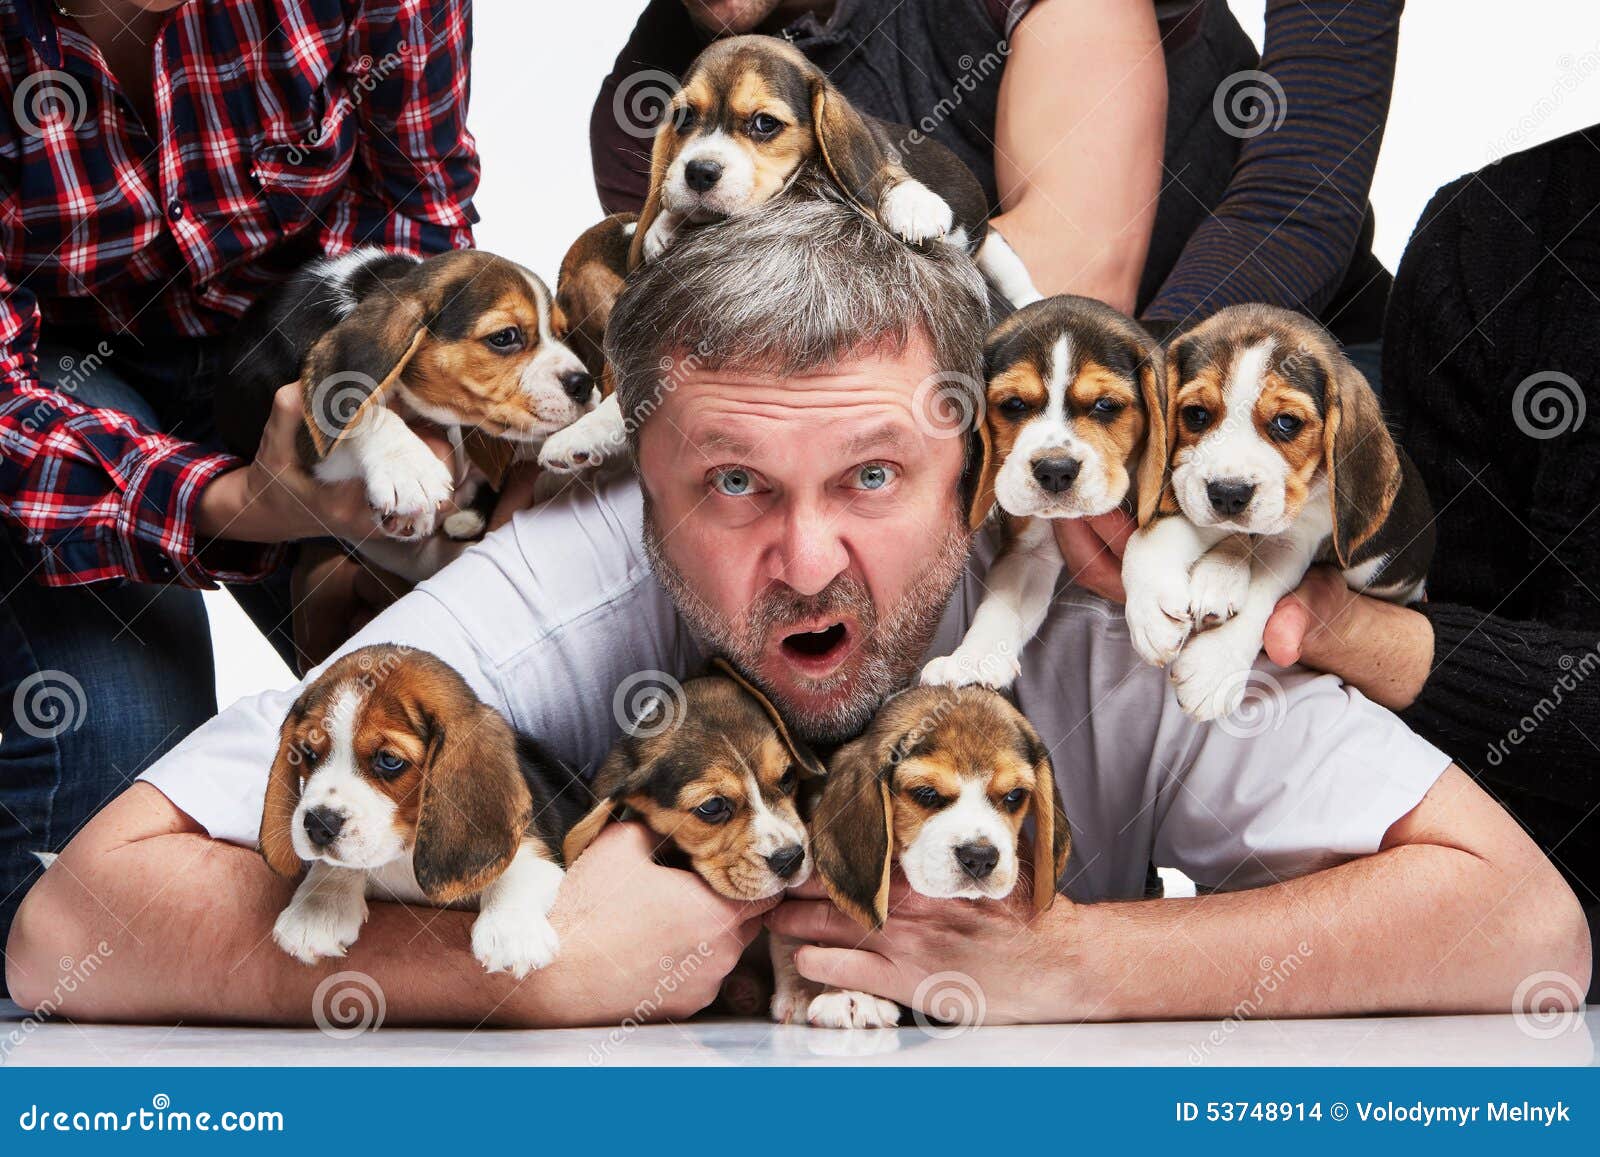 the man and big group of a beagle puppies